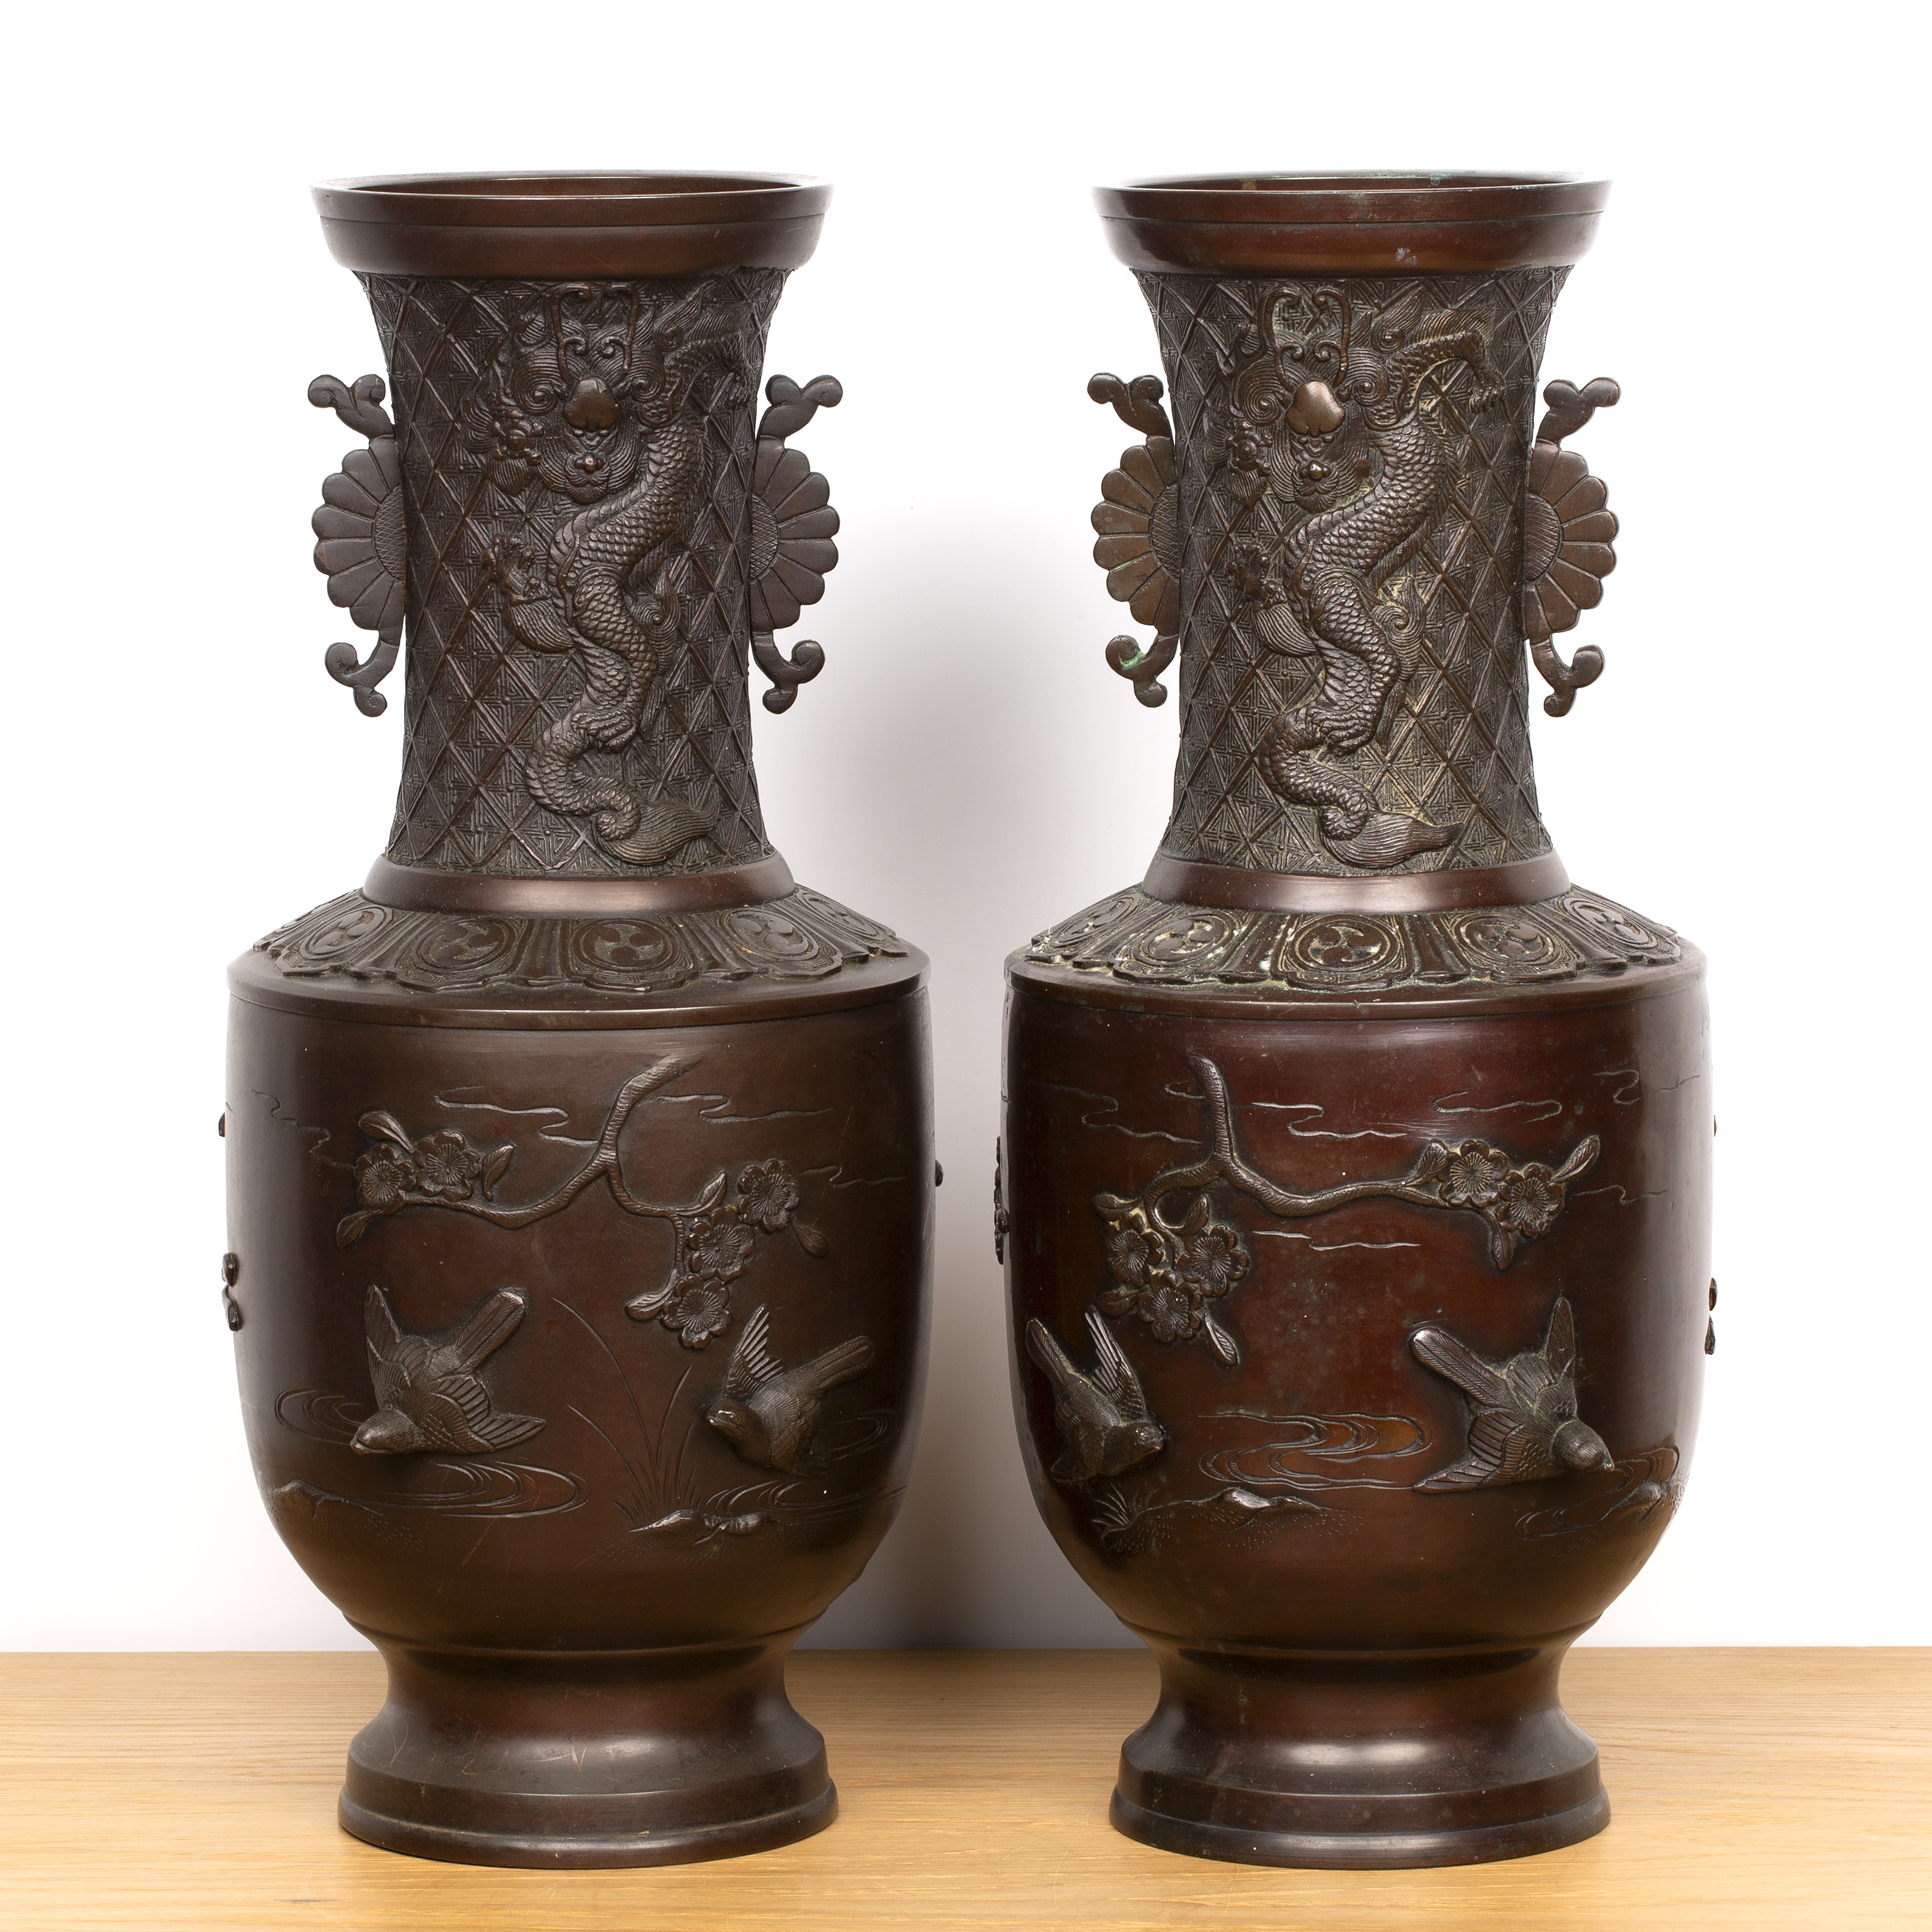 Pair of bronze vases Japanese, late 19th Century decorated with birds and mons motifs, with an - Image 2 of 7